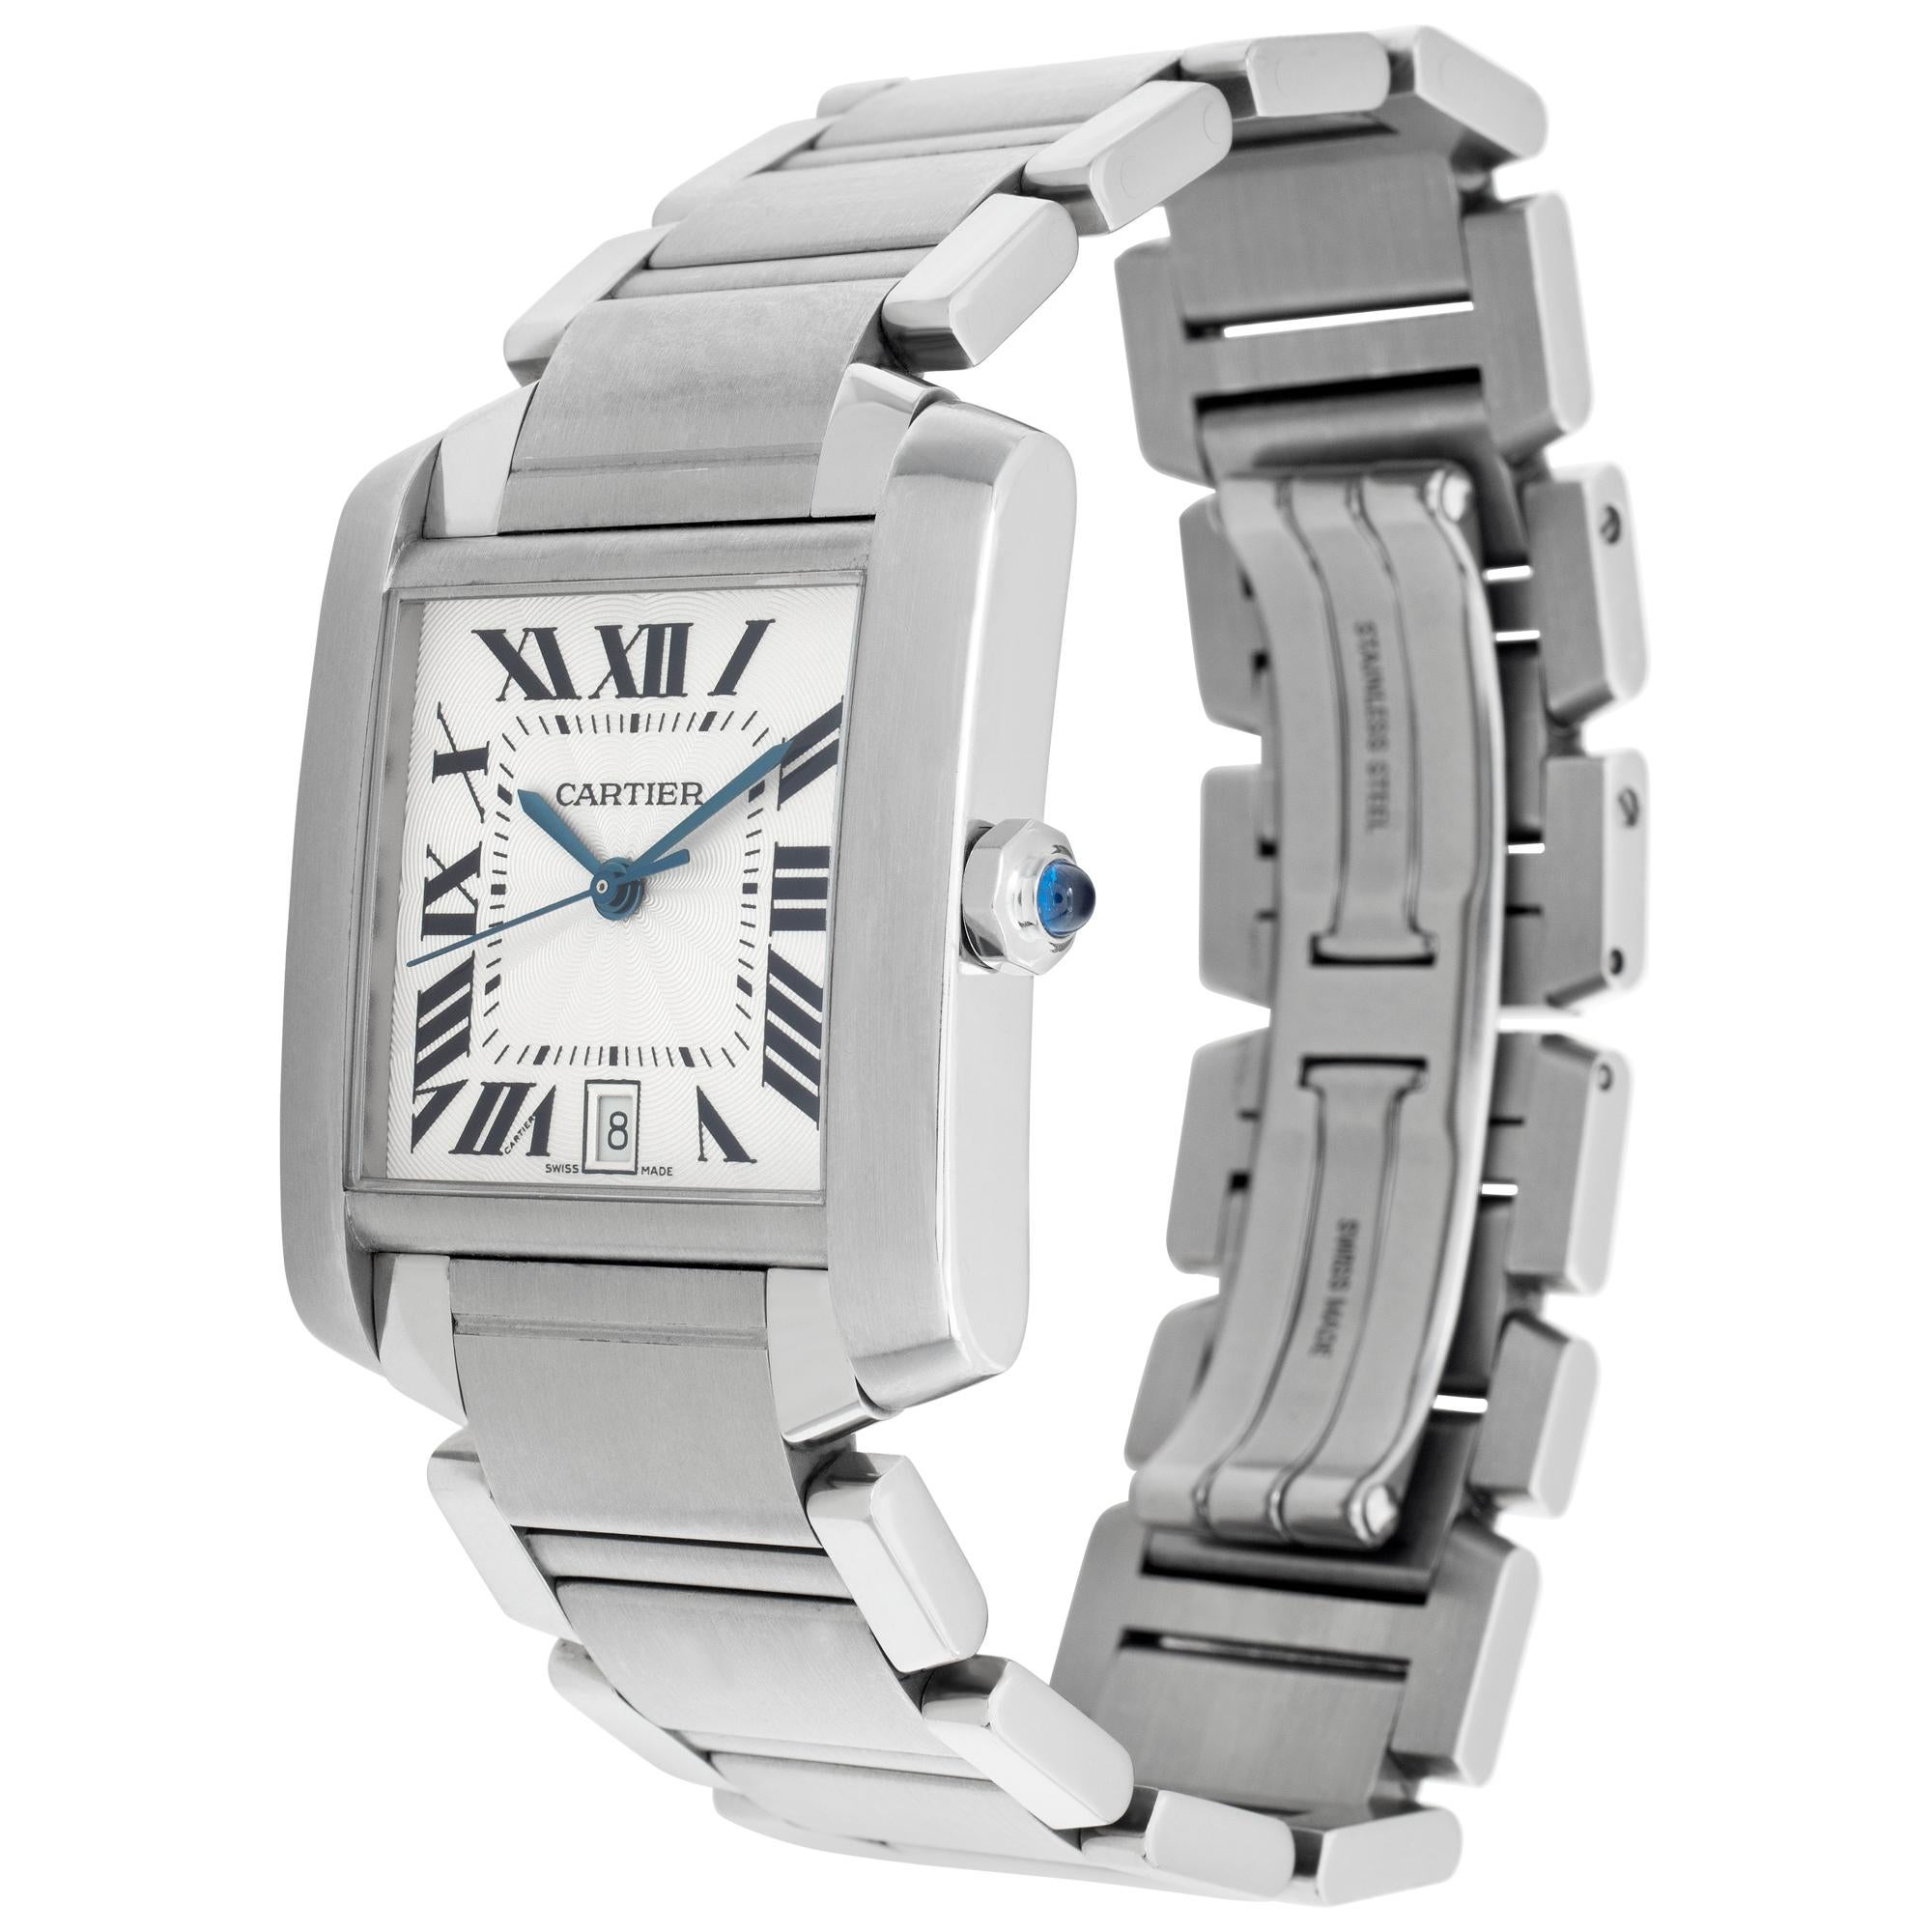 Cartier Tank Francaise in stainless steel. Auto, with date and sweep seconds. 28 mm case size. Ref W51002Q3 Circa 2010s. Fine Pre-owned Cartier Watch. Certified preowned Classic Cartier Tank Francaise W51002Q3 watch is made out of Stainless steel on